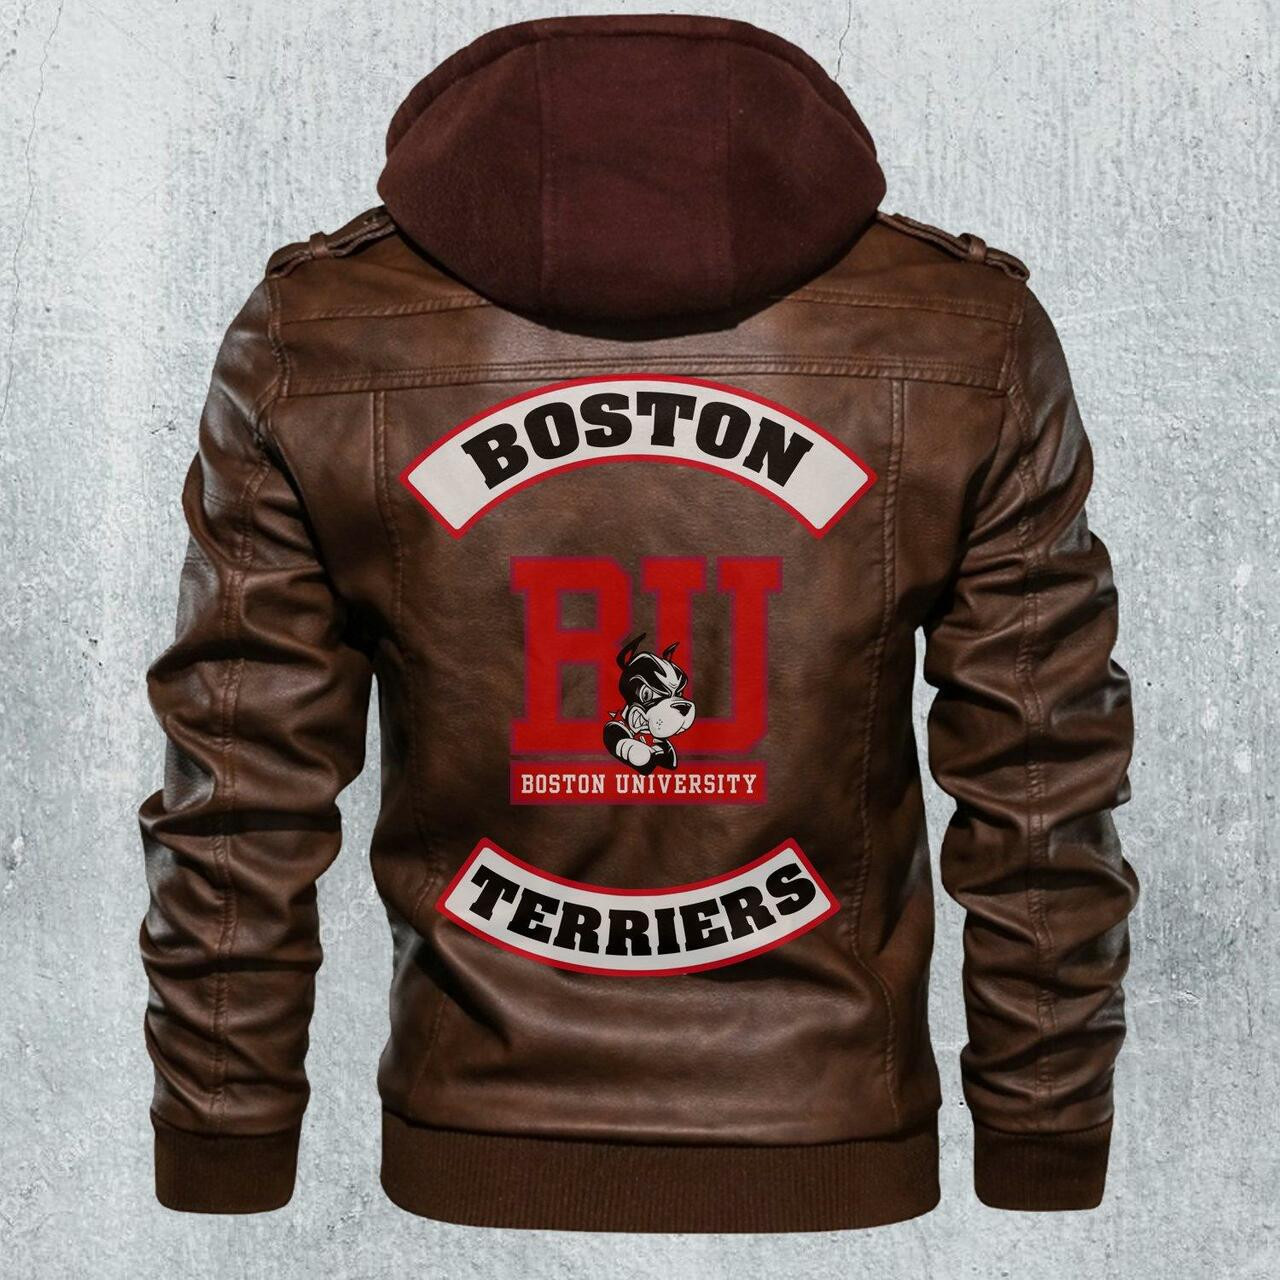 Our store has all of the latest leather jacket 177